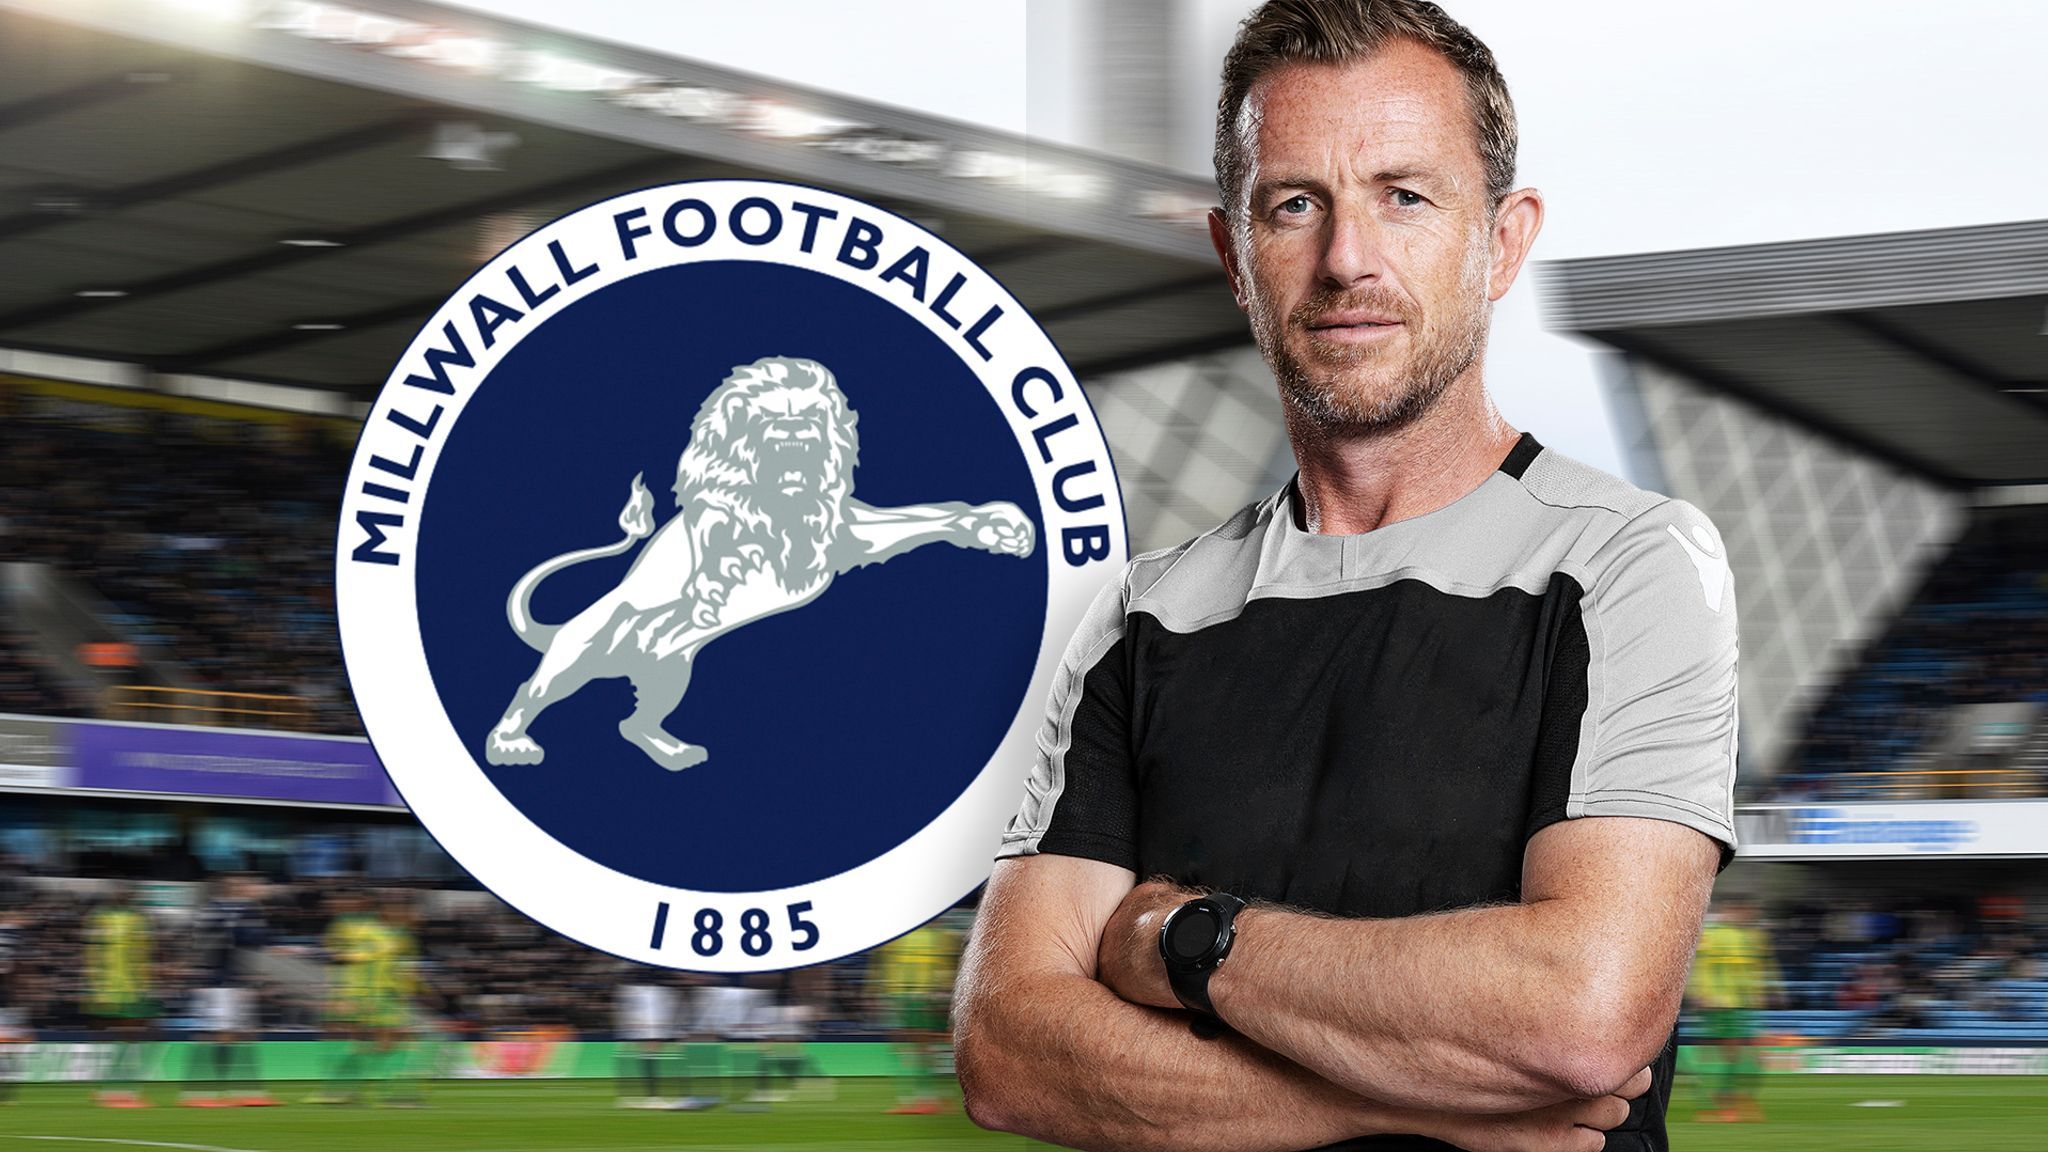 Millwall Manager Gary Rowett Takes Sky Sports On Behind The Scenes